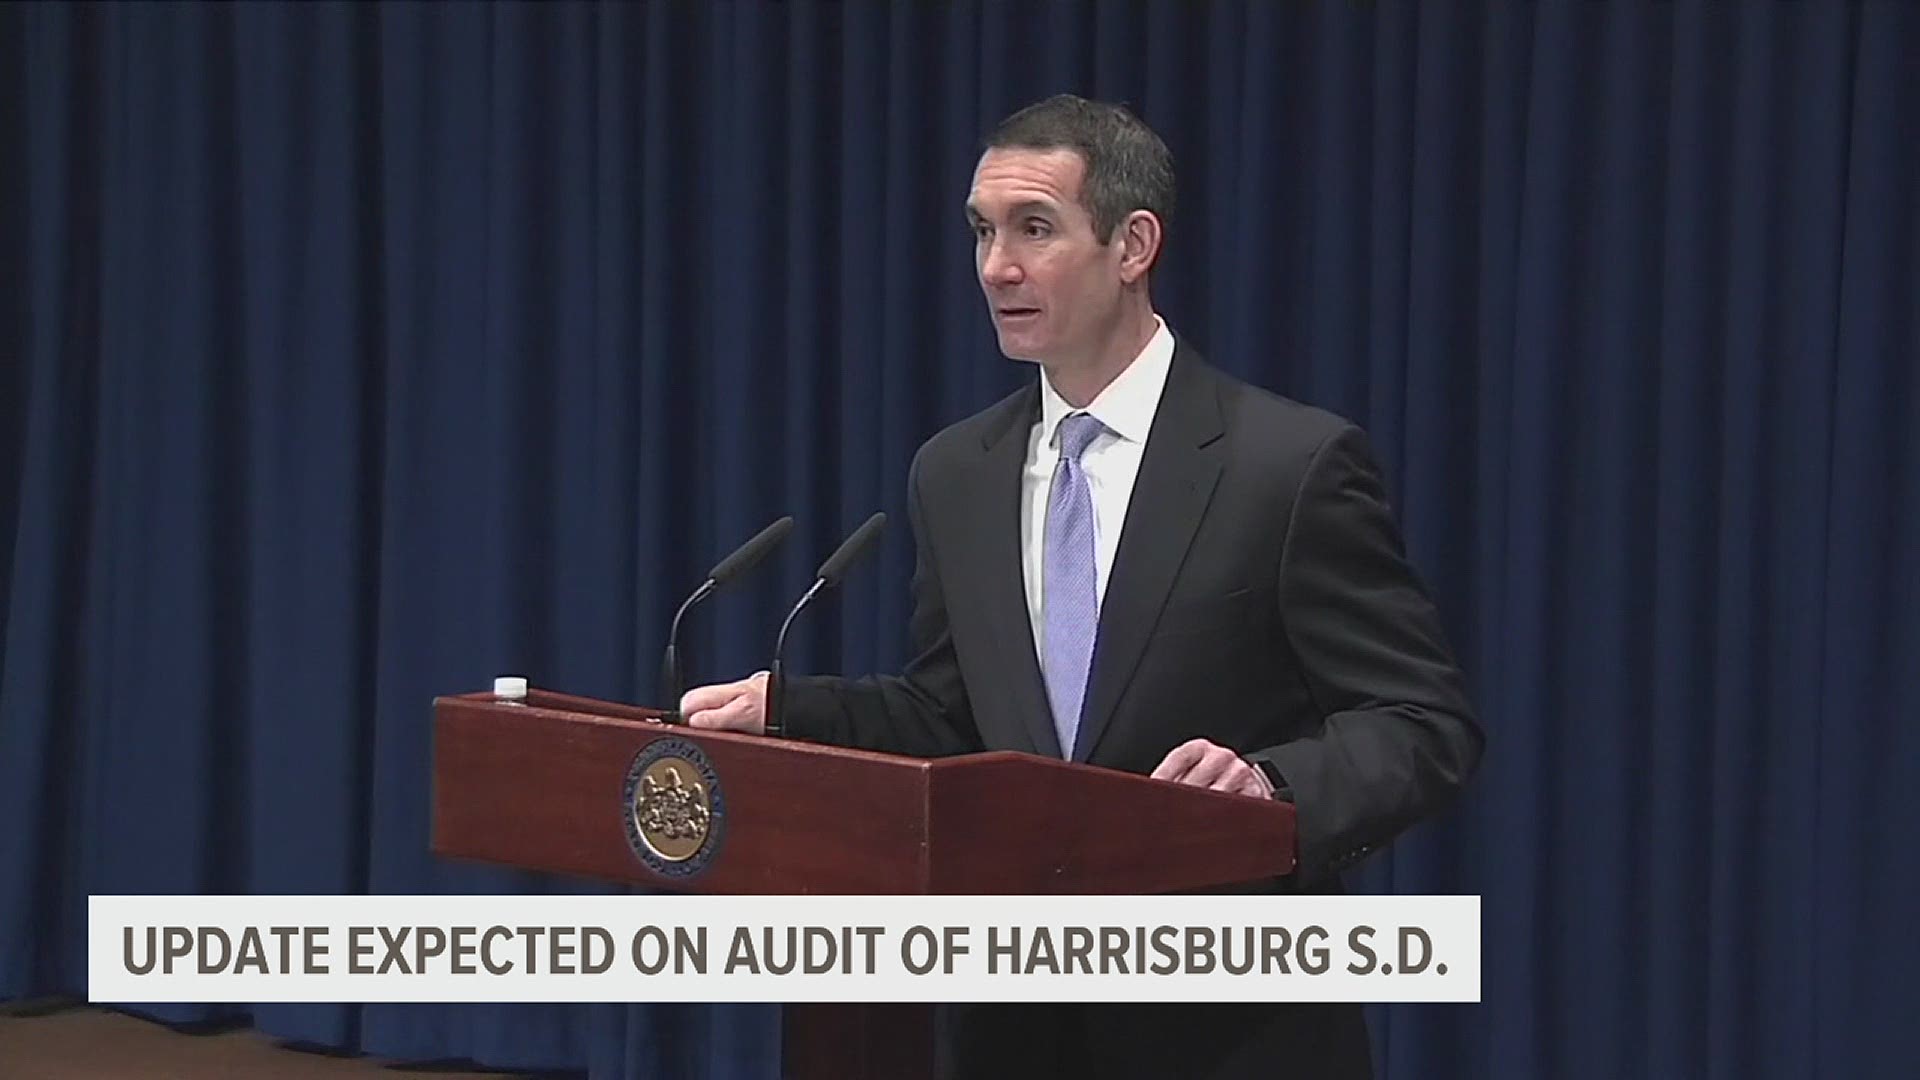 Depasquale's most recent update revealed errors in the school districts budget, and that they were working to strengthen their human resource policies.